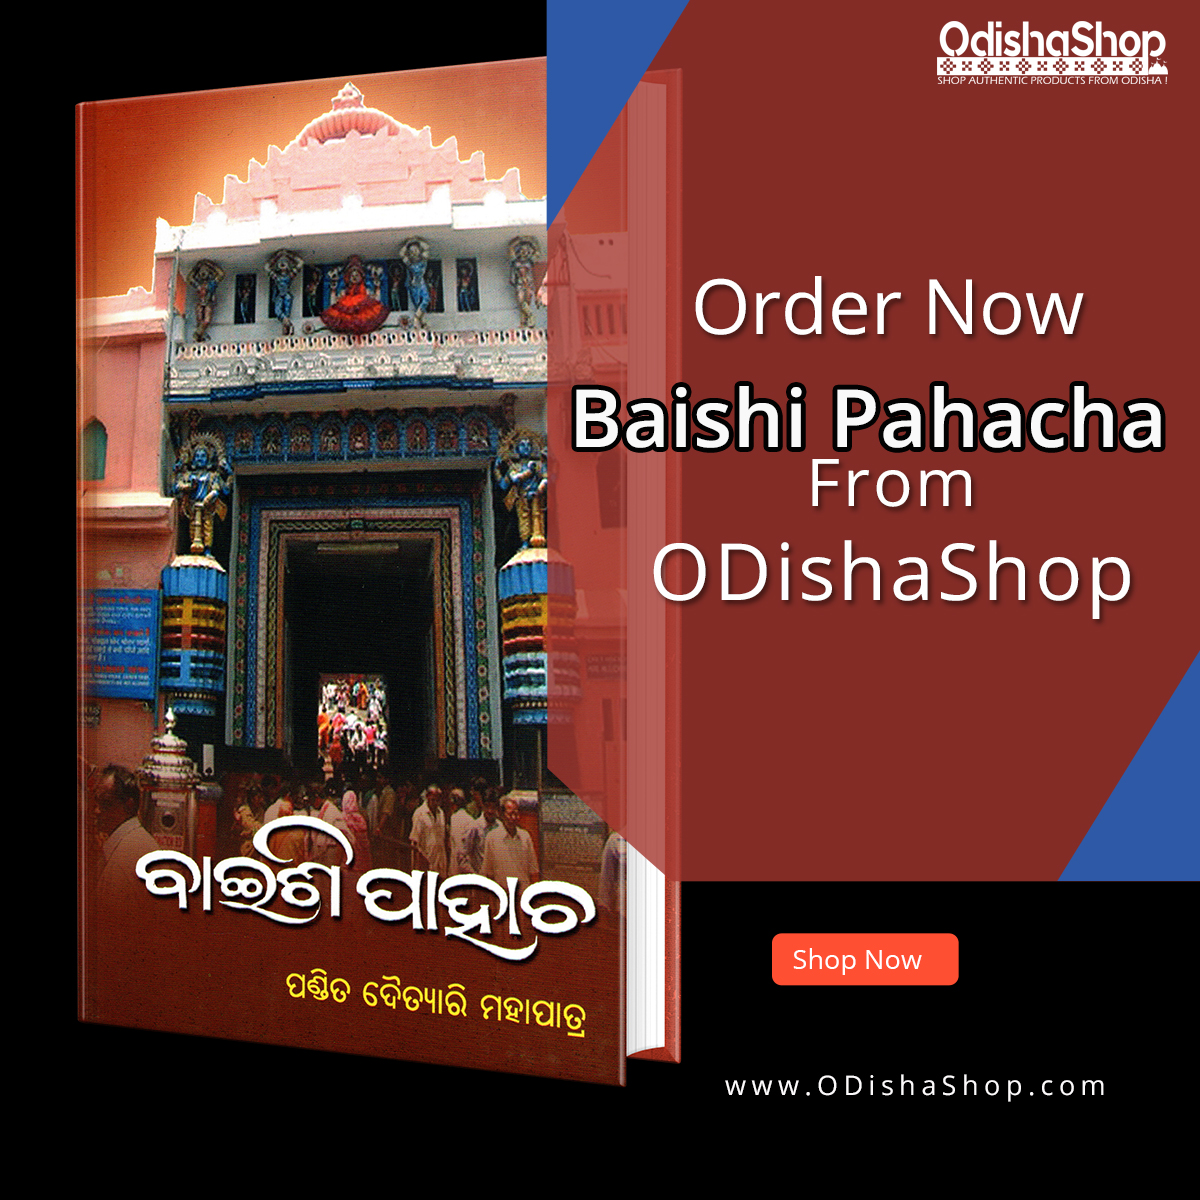 Just finished reading Baishi Pahacha by Pandit Daityari and I am in awe of how the author seamlessly weaves together themes of nature, spirituality, and human interconnectedness.  #mustread #literarygems
odishashop.com/product/odia-b…